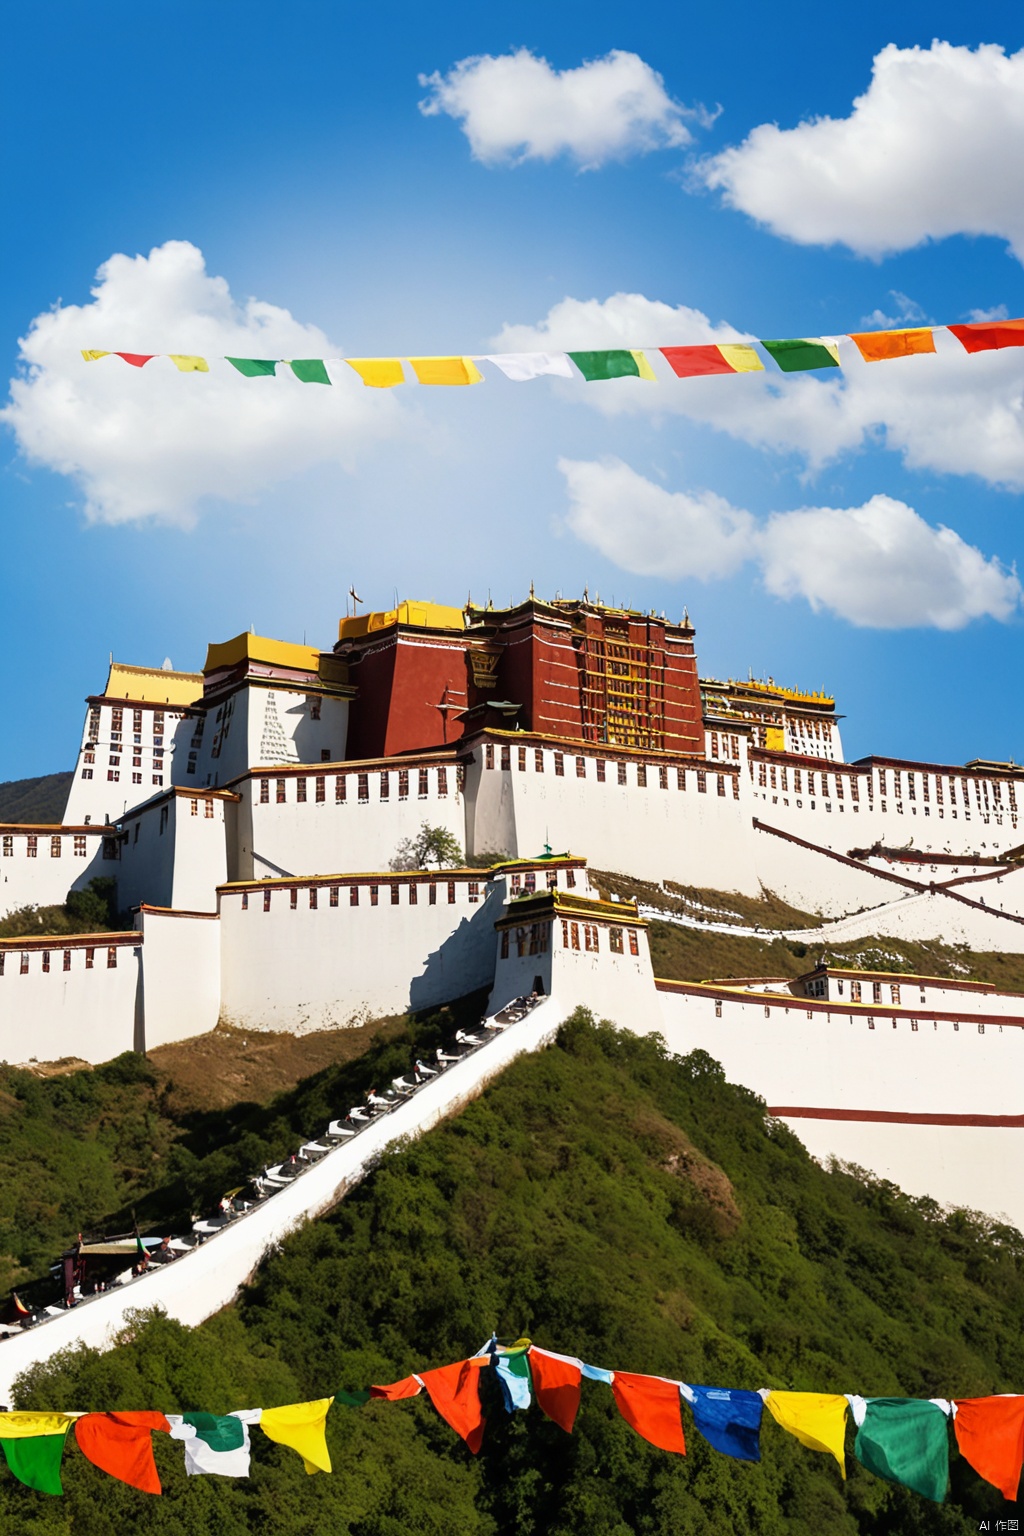 Potala Palace, full of colorful prayer flags, outdoor, blue sky, white clouds, Guochao illustration, gilding, art, illustration, wallpaper, high resolution